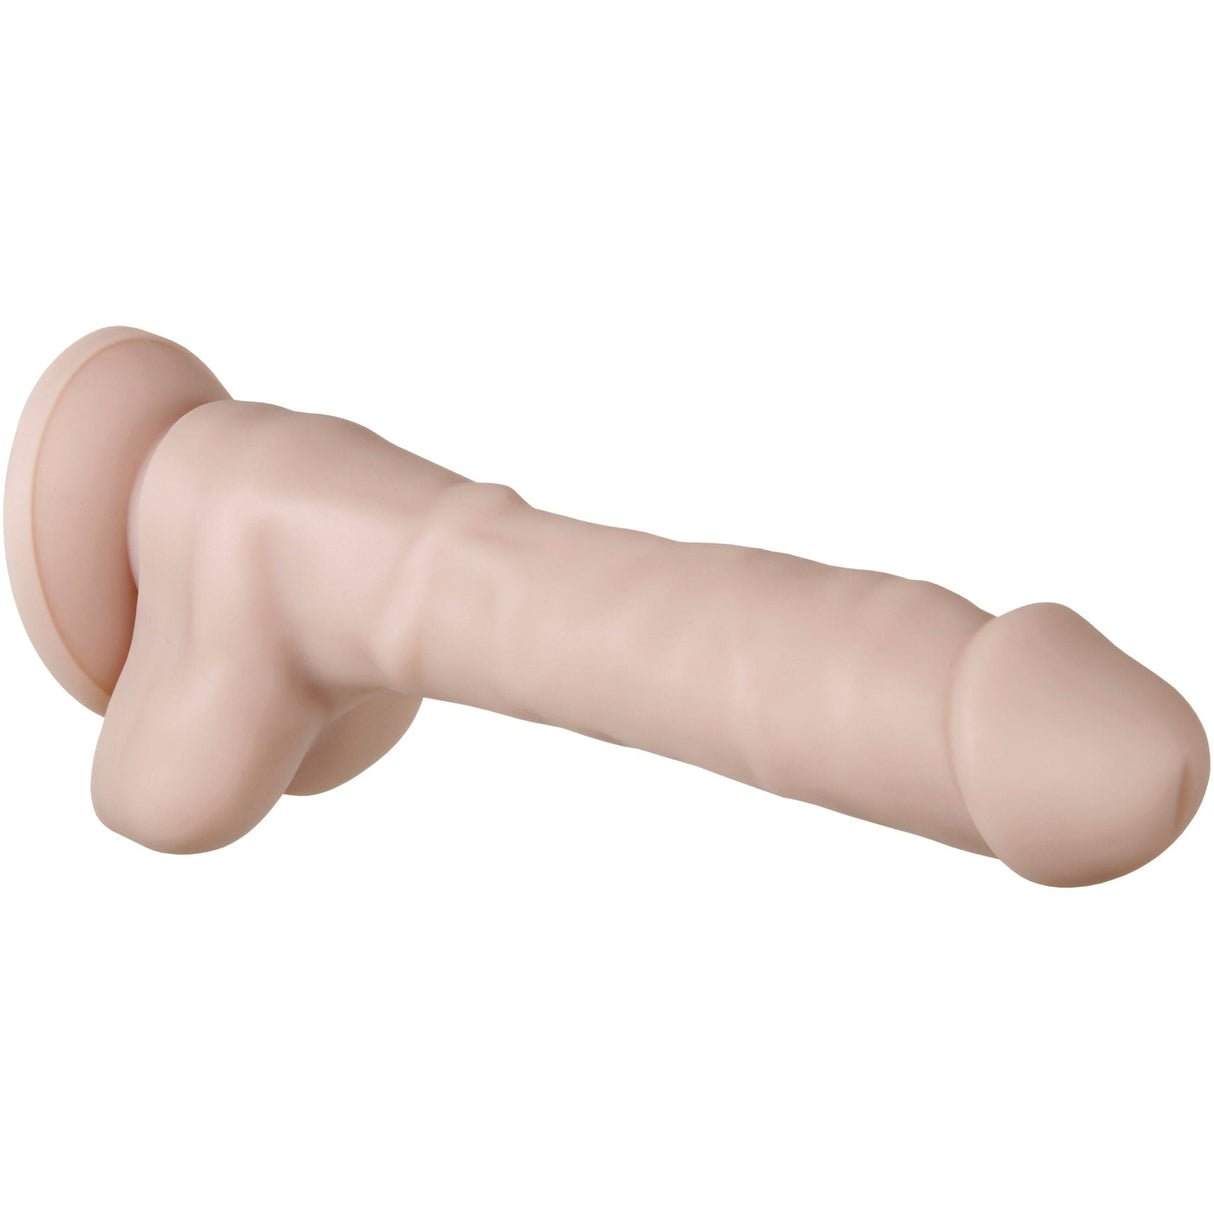 Evolved - Real Supple Silicone Posable Realistic Dildo CherryAffairs